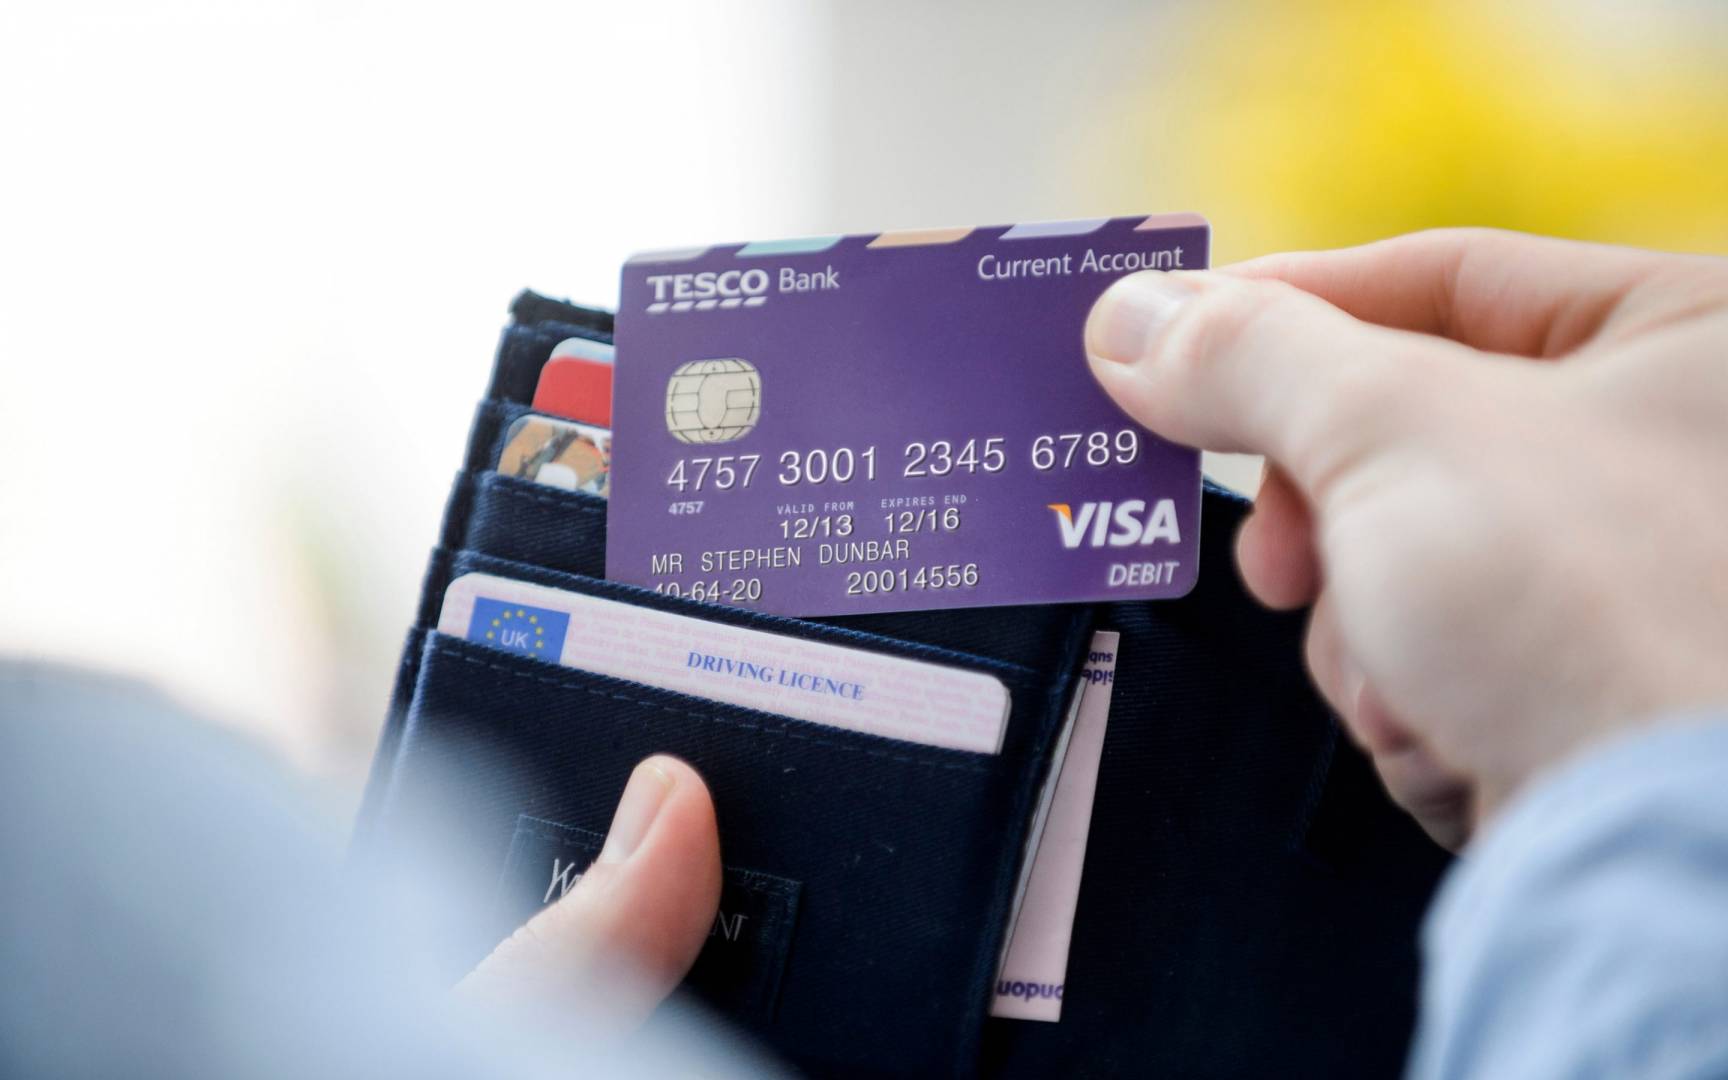 Credit card betting in UK set to come to an end